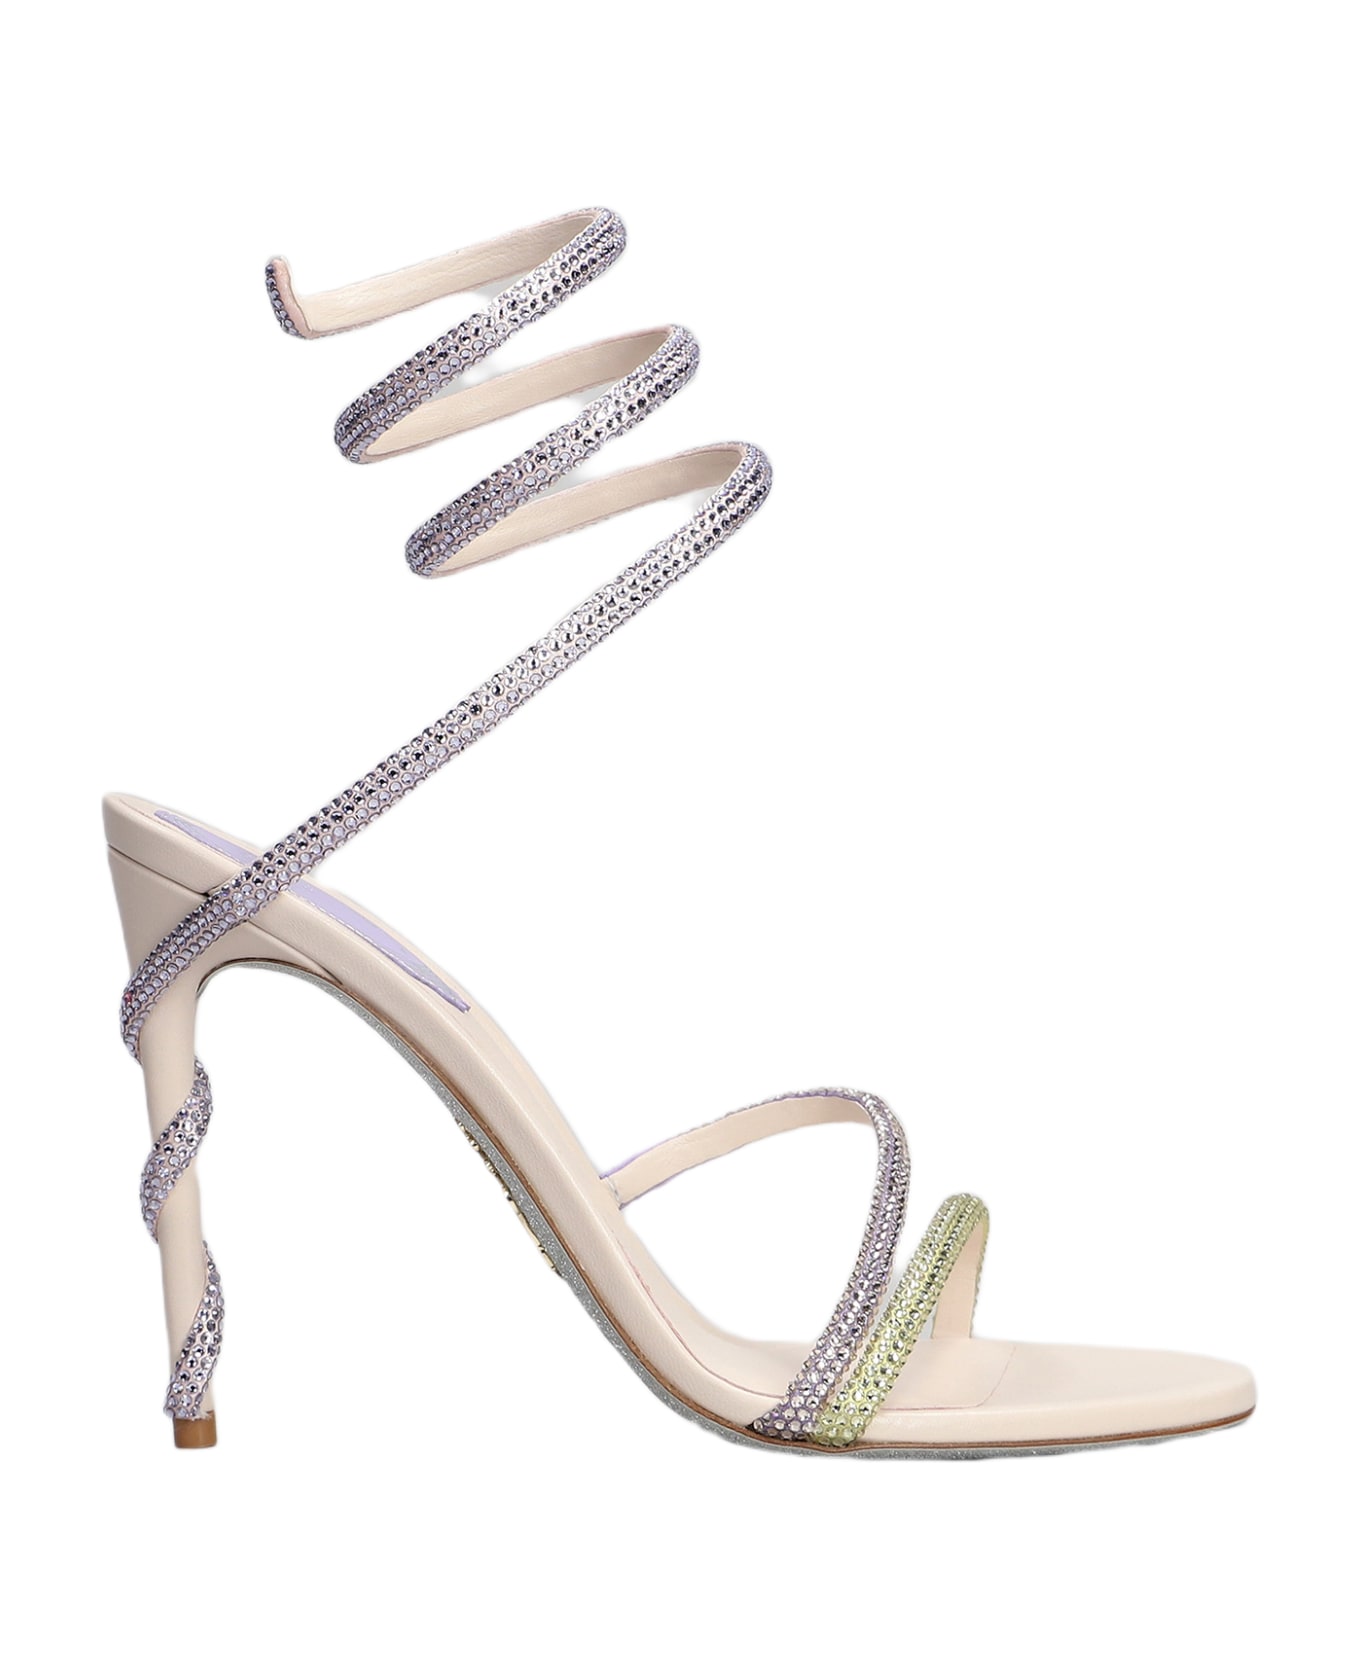 René Caovilla Margot Sandals In Yellow Leather - yellow